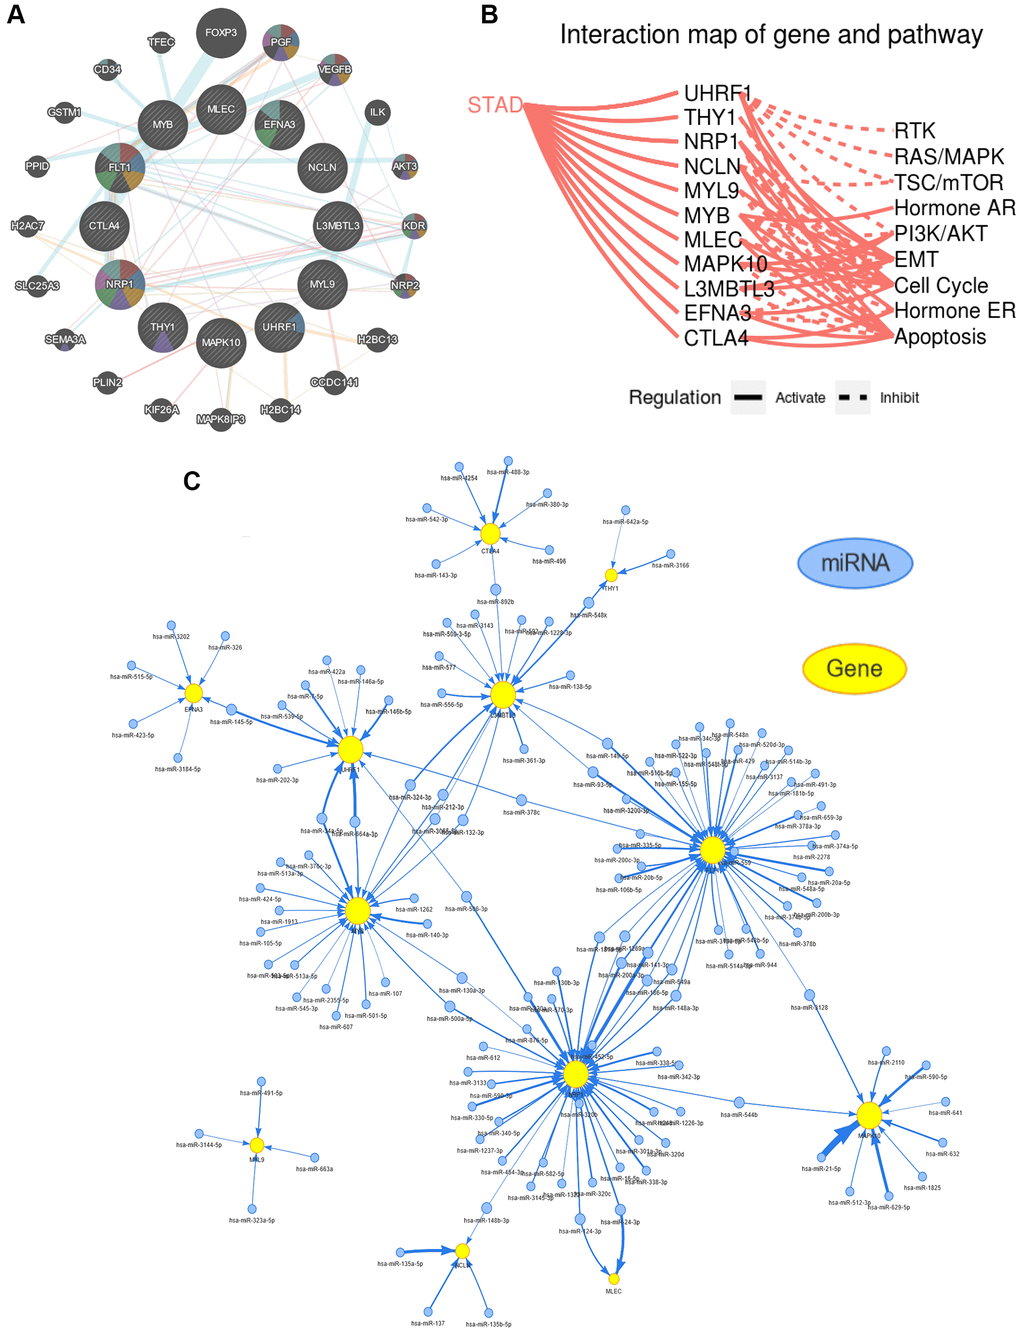 Functional and pathway enrichment analysis of the hub genes. (A) Construction of a protein-protein interaction (PPI) network through using the GeneMANIA database. (B) The hub genes being involved in several key cancer-associated processes, such as epithelial-mesenchymal transition (EMT), receptor tyrosine kinase (RTK), cell cycle, apoptosis, etc. (C) The result of predicted miRNAs targeting hub genes using the GSCALite website.